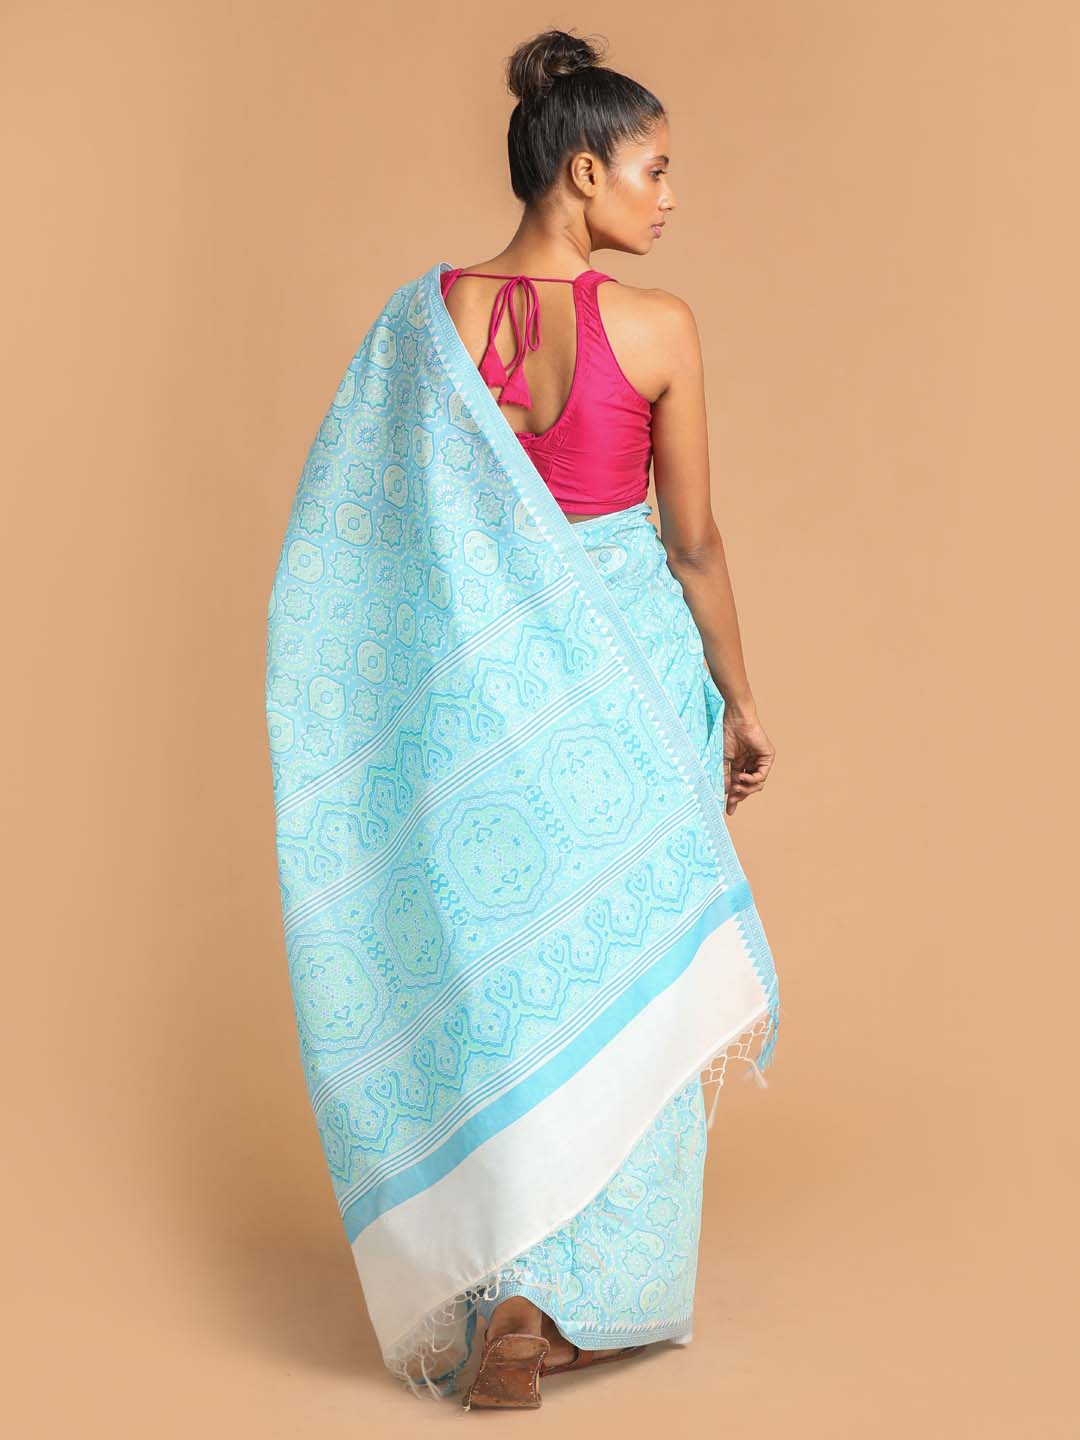 Indethnic Printed Cotton Blend Saree in Blue - View 3